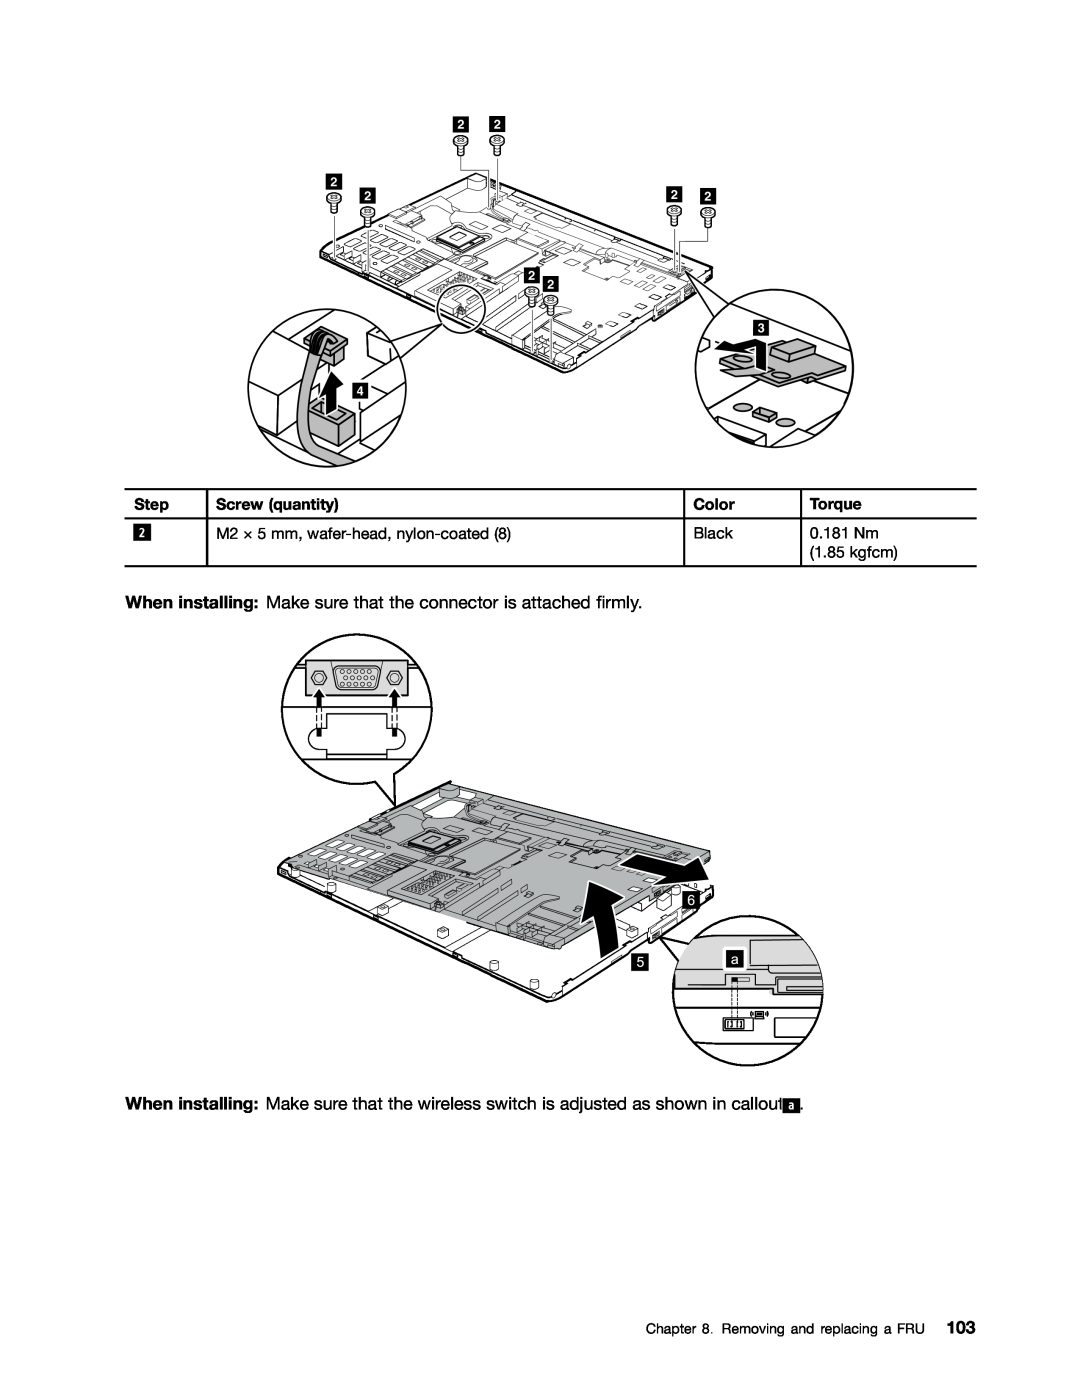 Lenovo T420i manual When installing Make sure that the connector is attached firmly, Step, Screw quantity, Color, Torque 